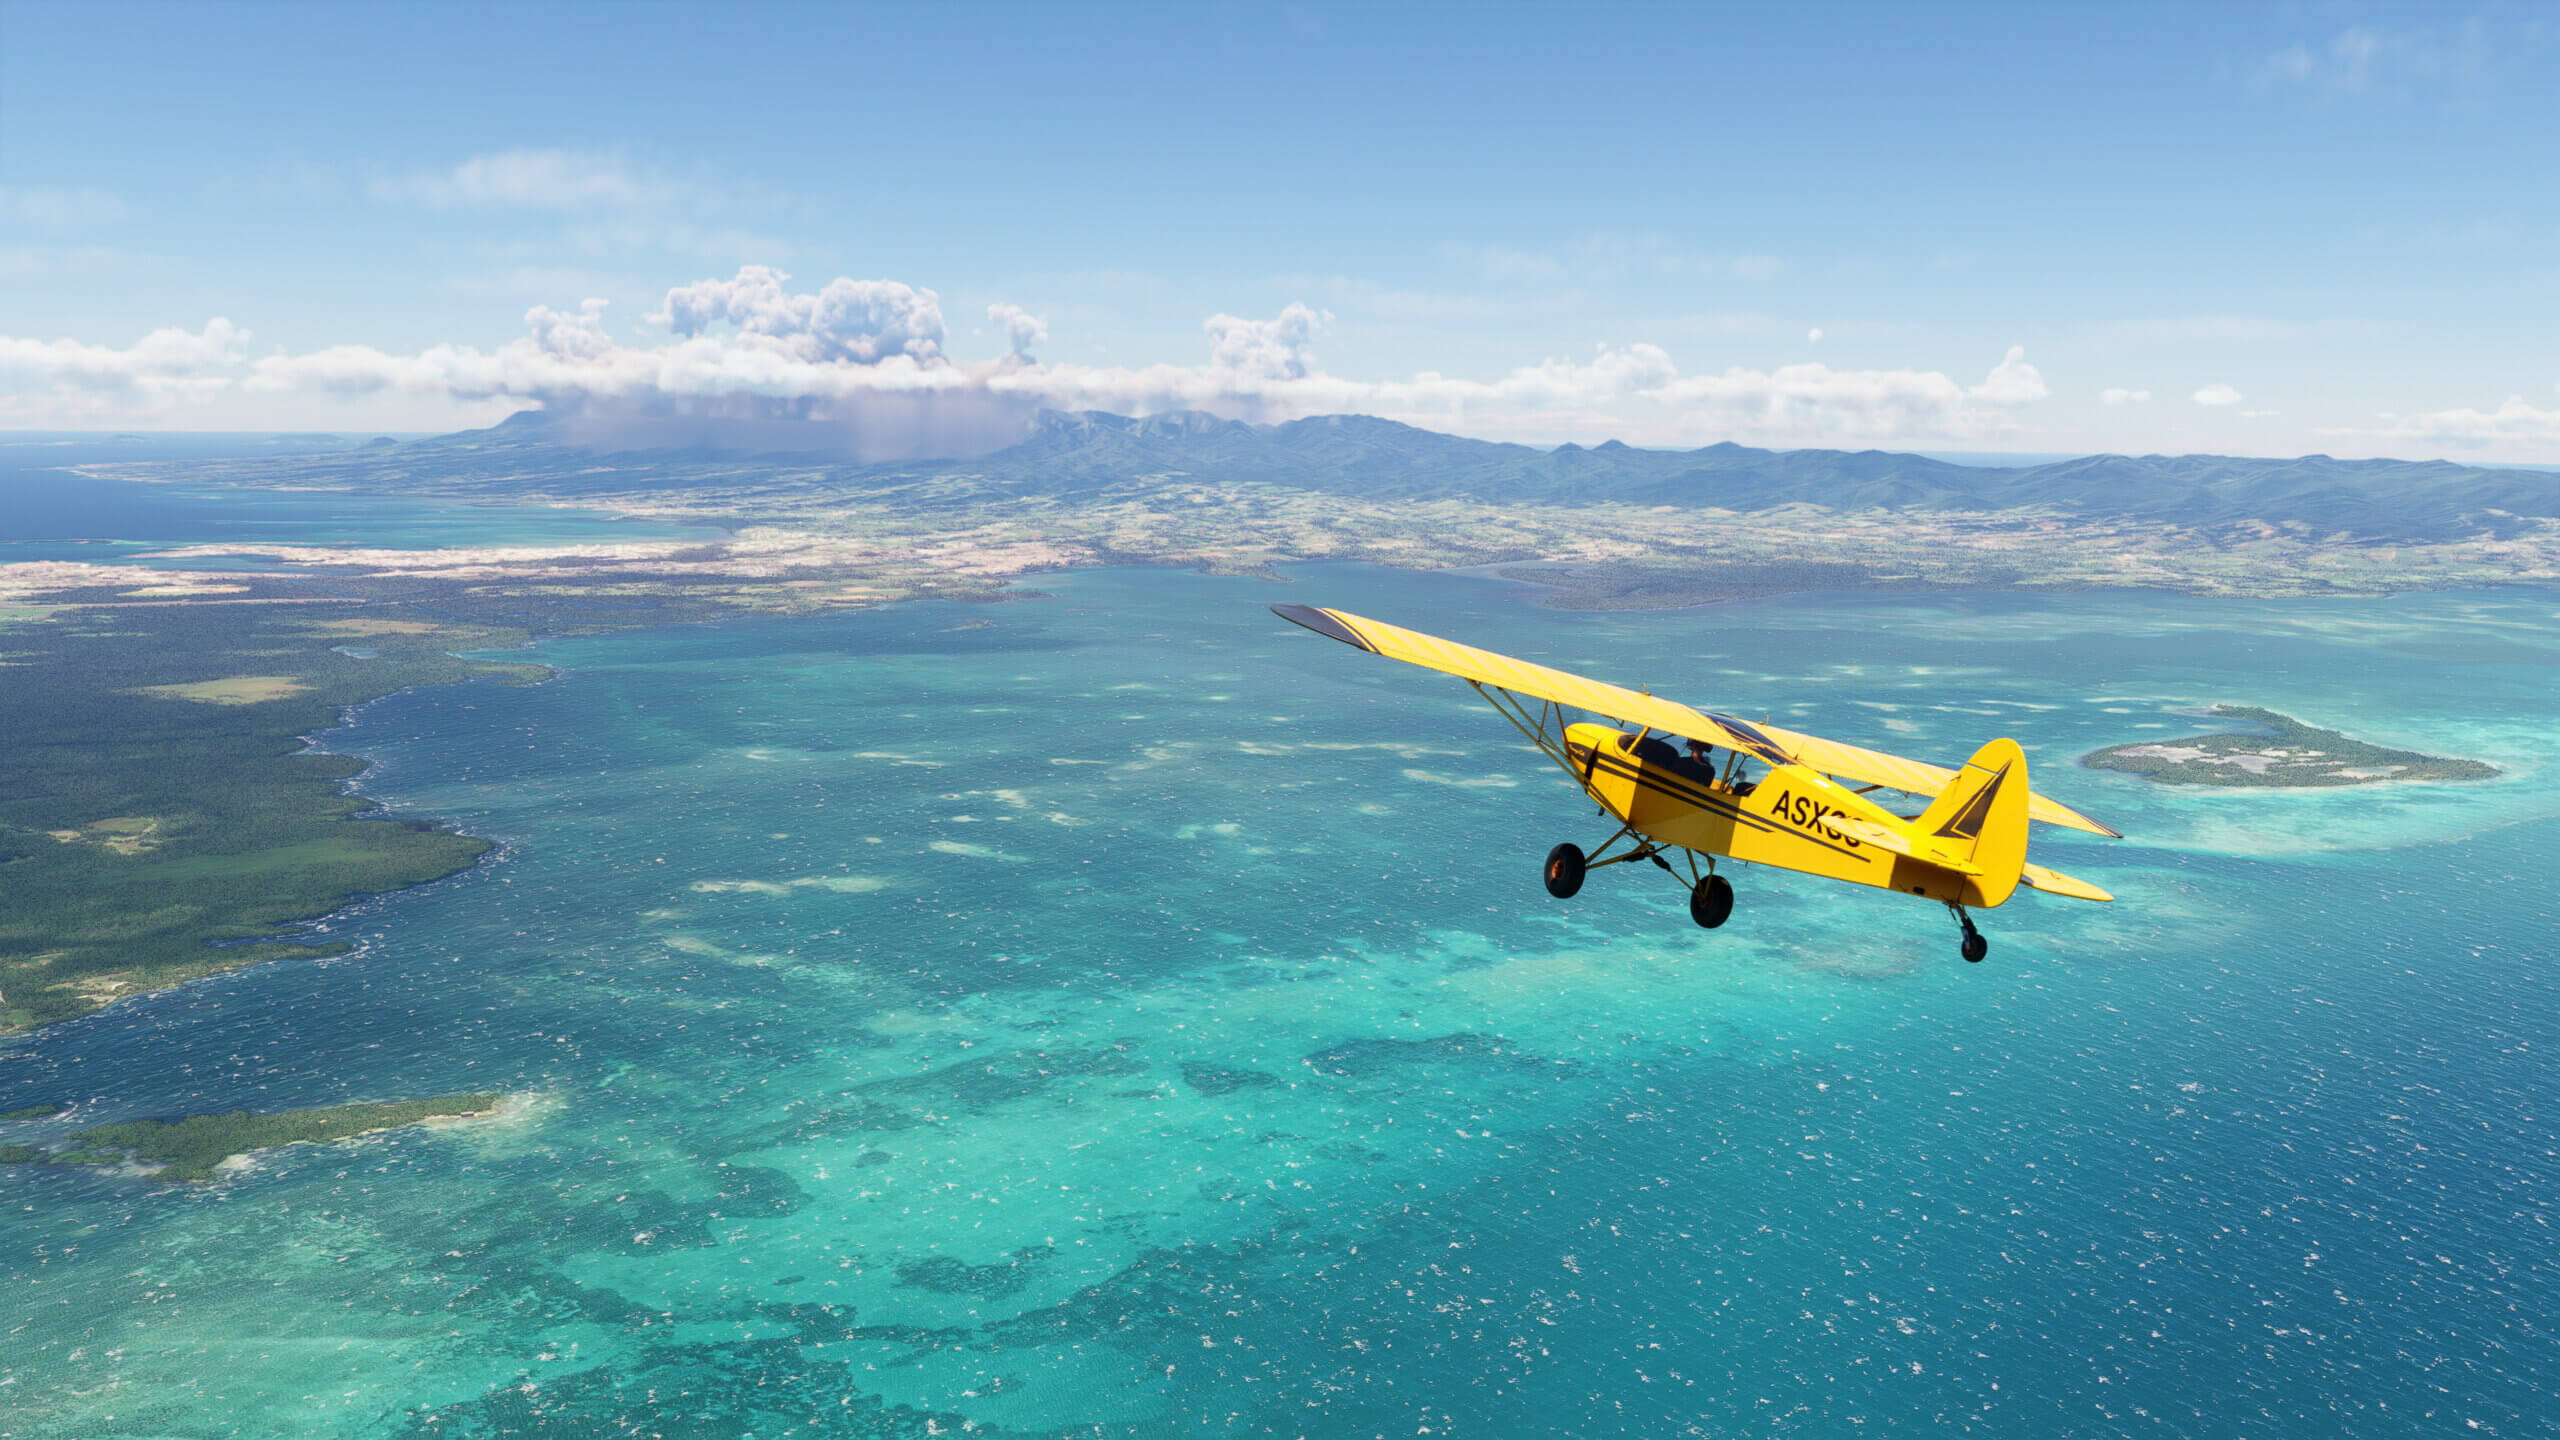 A Savage Cub flies over the Caribbean